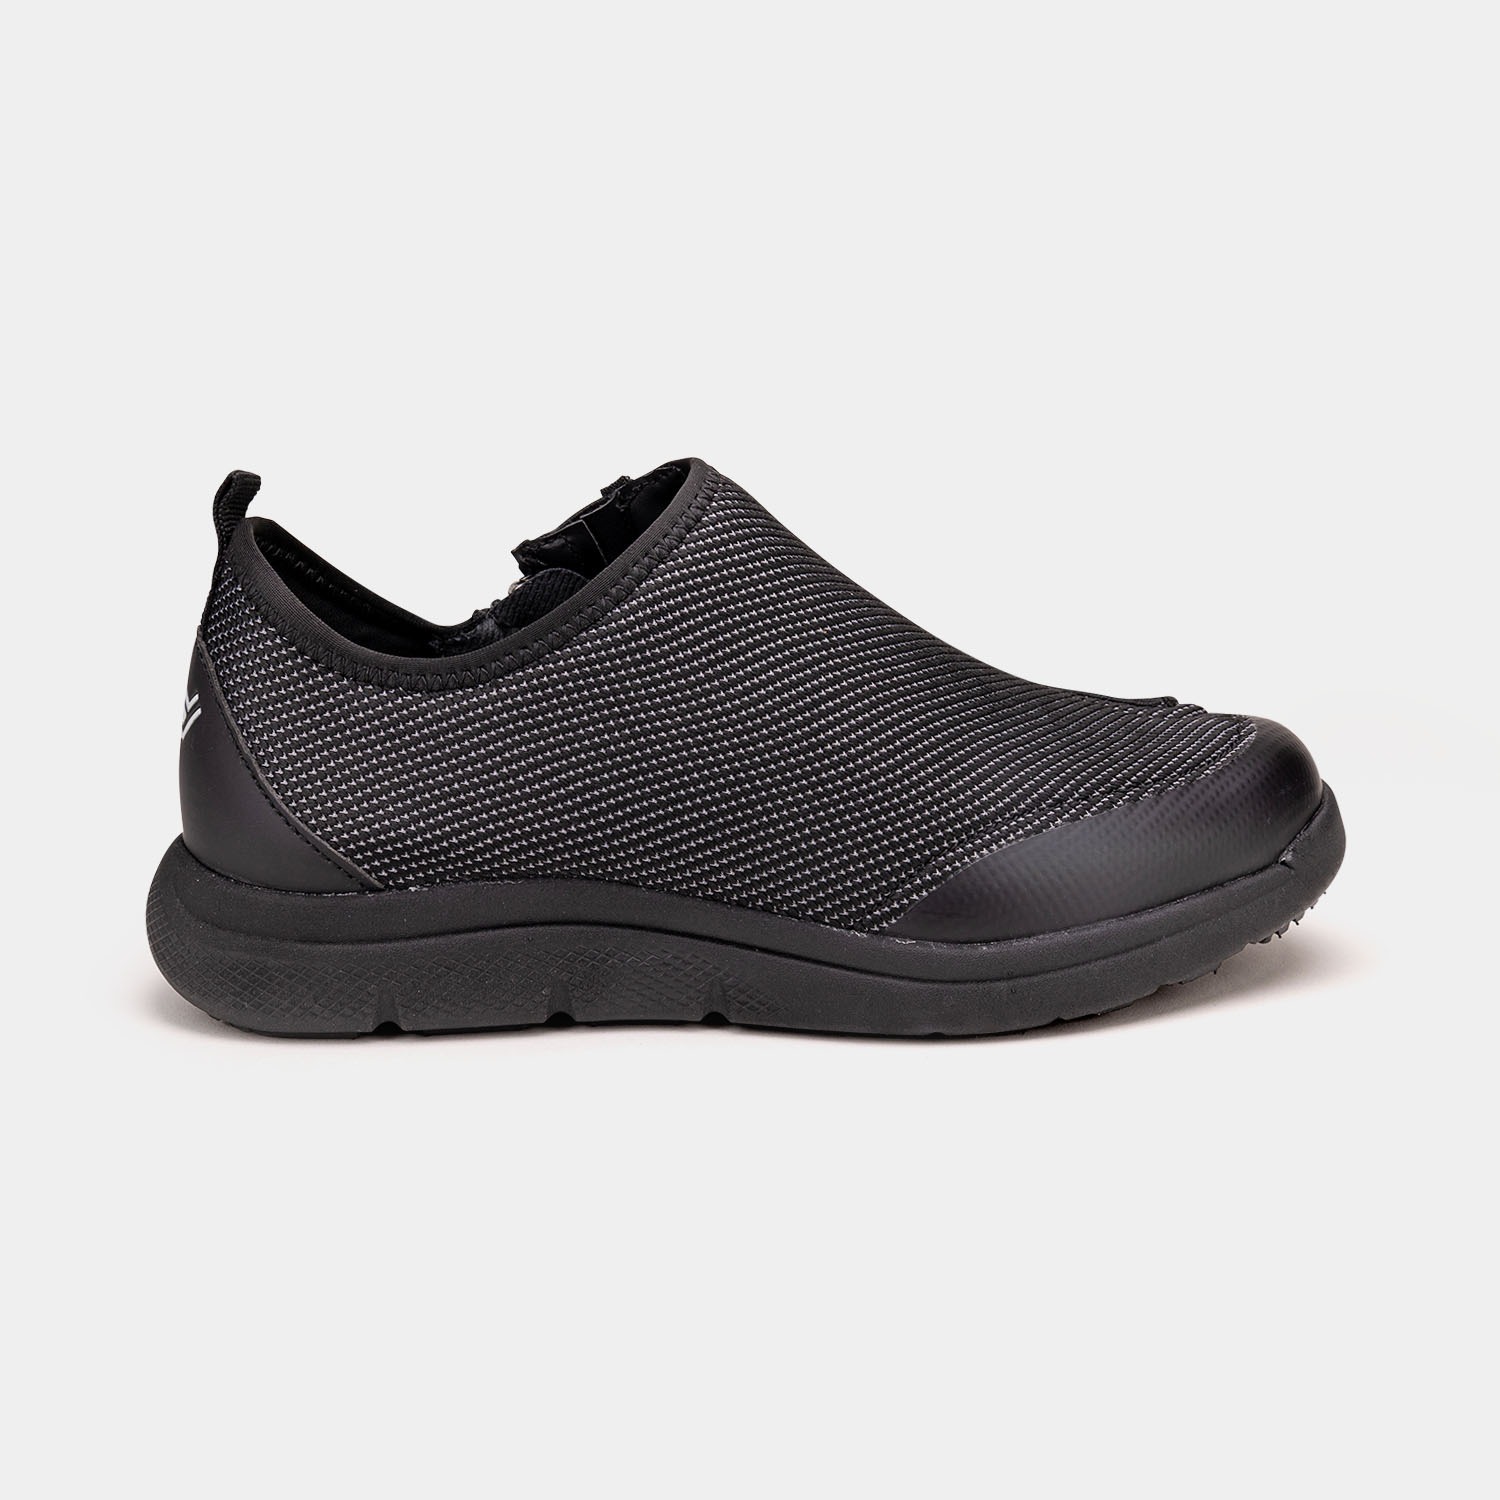 Unisex Force Black - Friendly Shoes - The Shoe for All Abilities